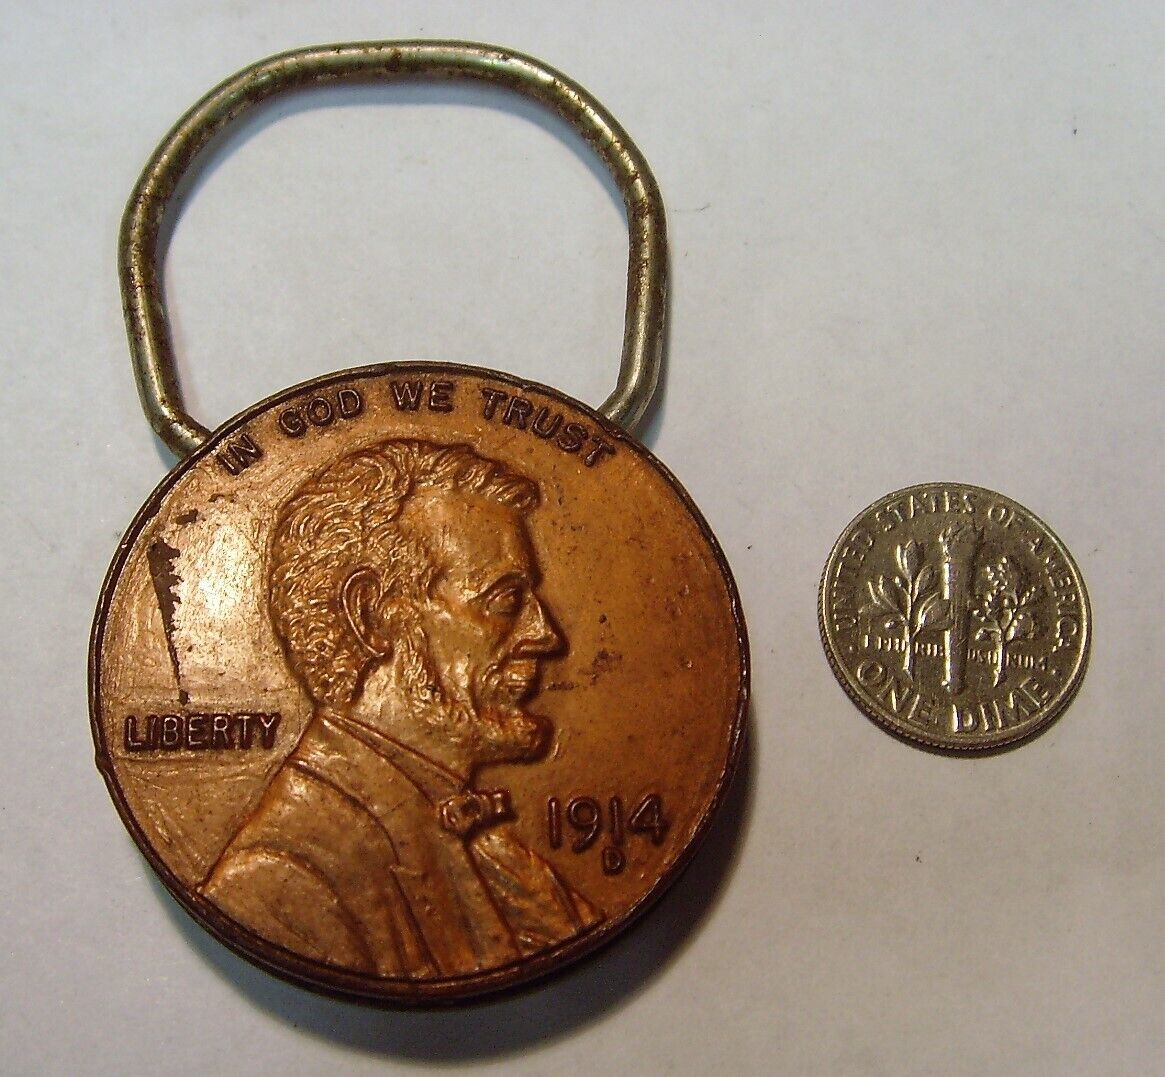 1914 large mock coin president Lincoln key chain first national bank fv1635